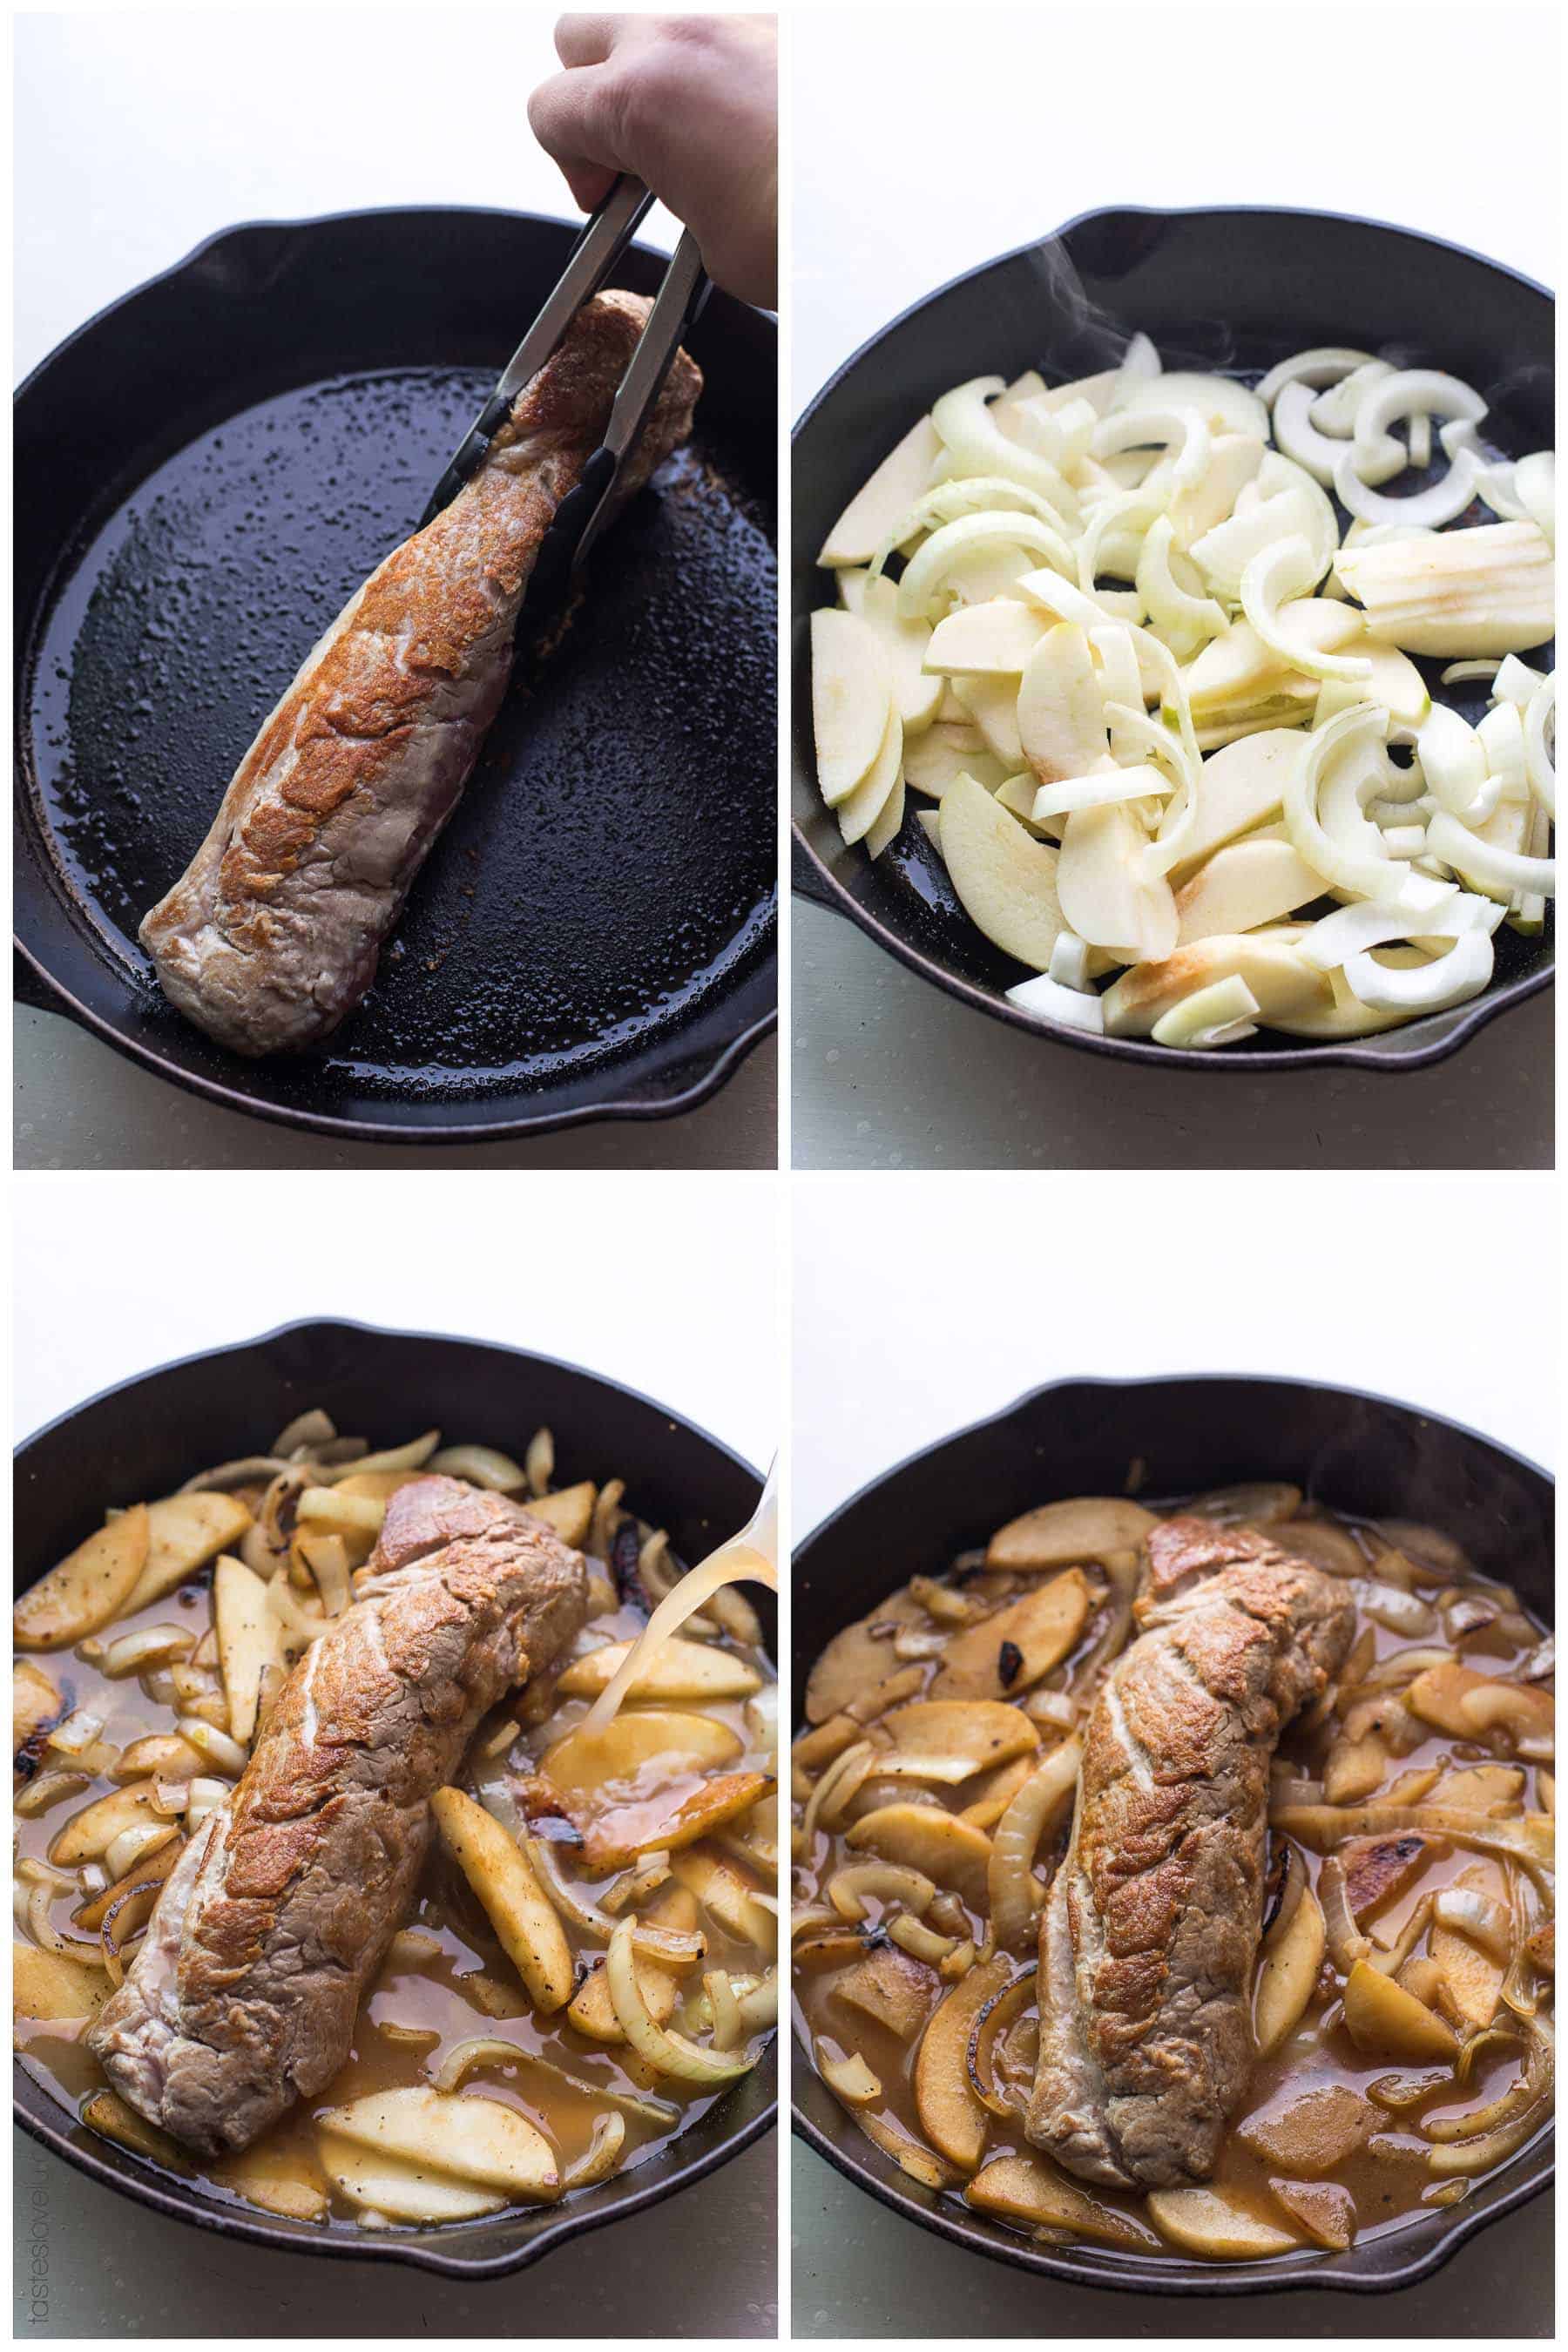 Paleo and Whole30 Apple & Onion Braised Pork Tenderloin - a flavorful and juicy dinner recipe that is dairy free, gluten free, sugar free